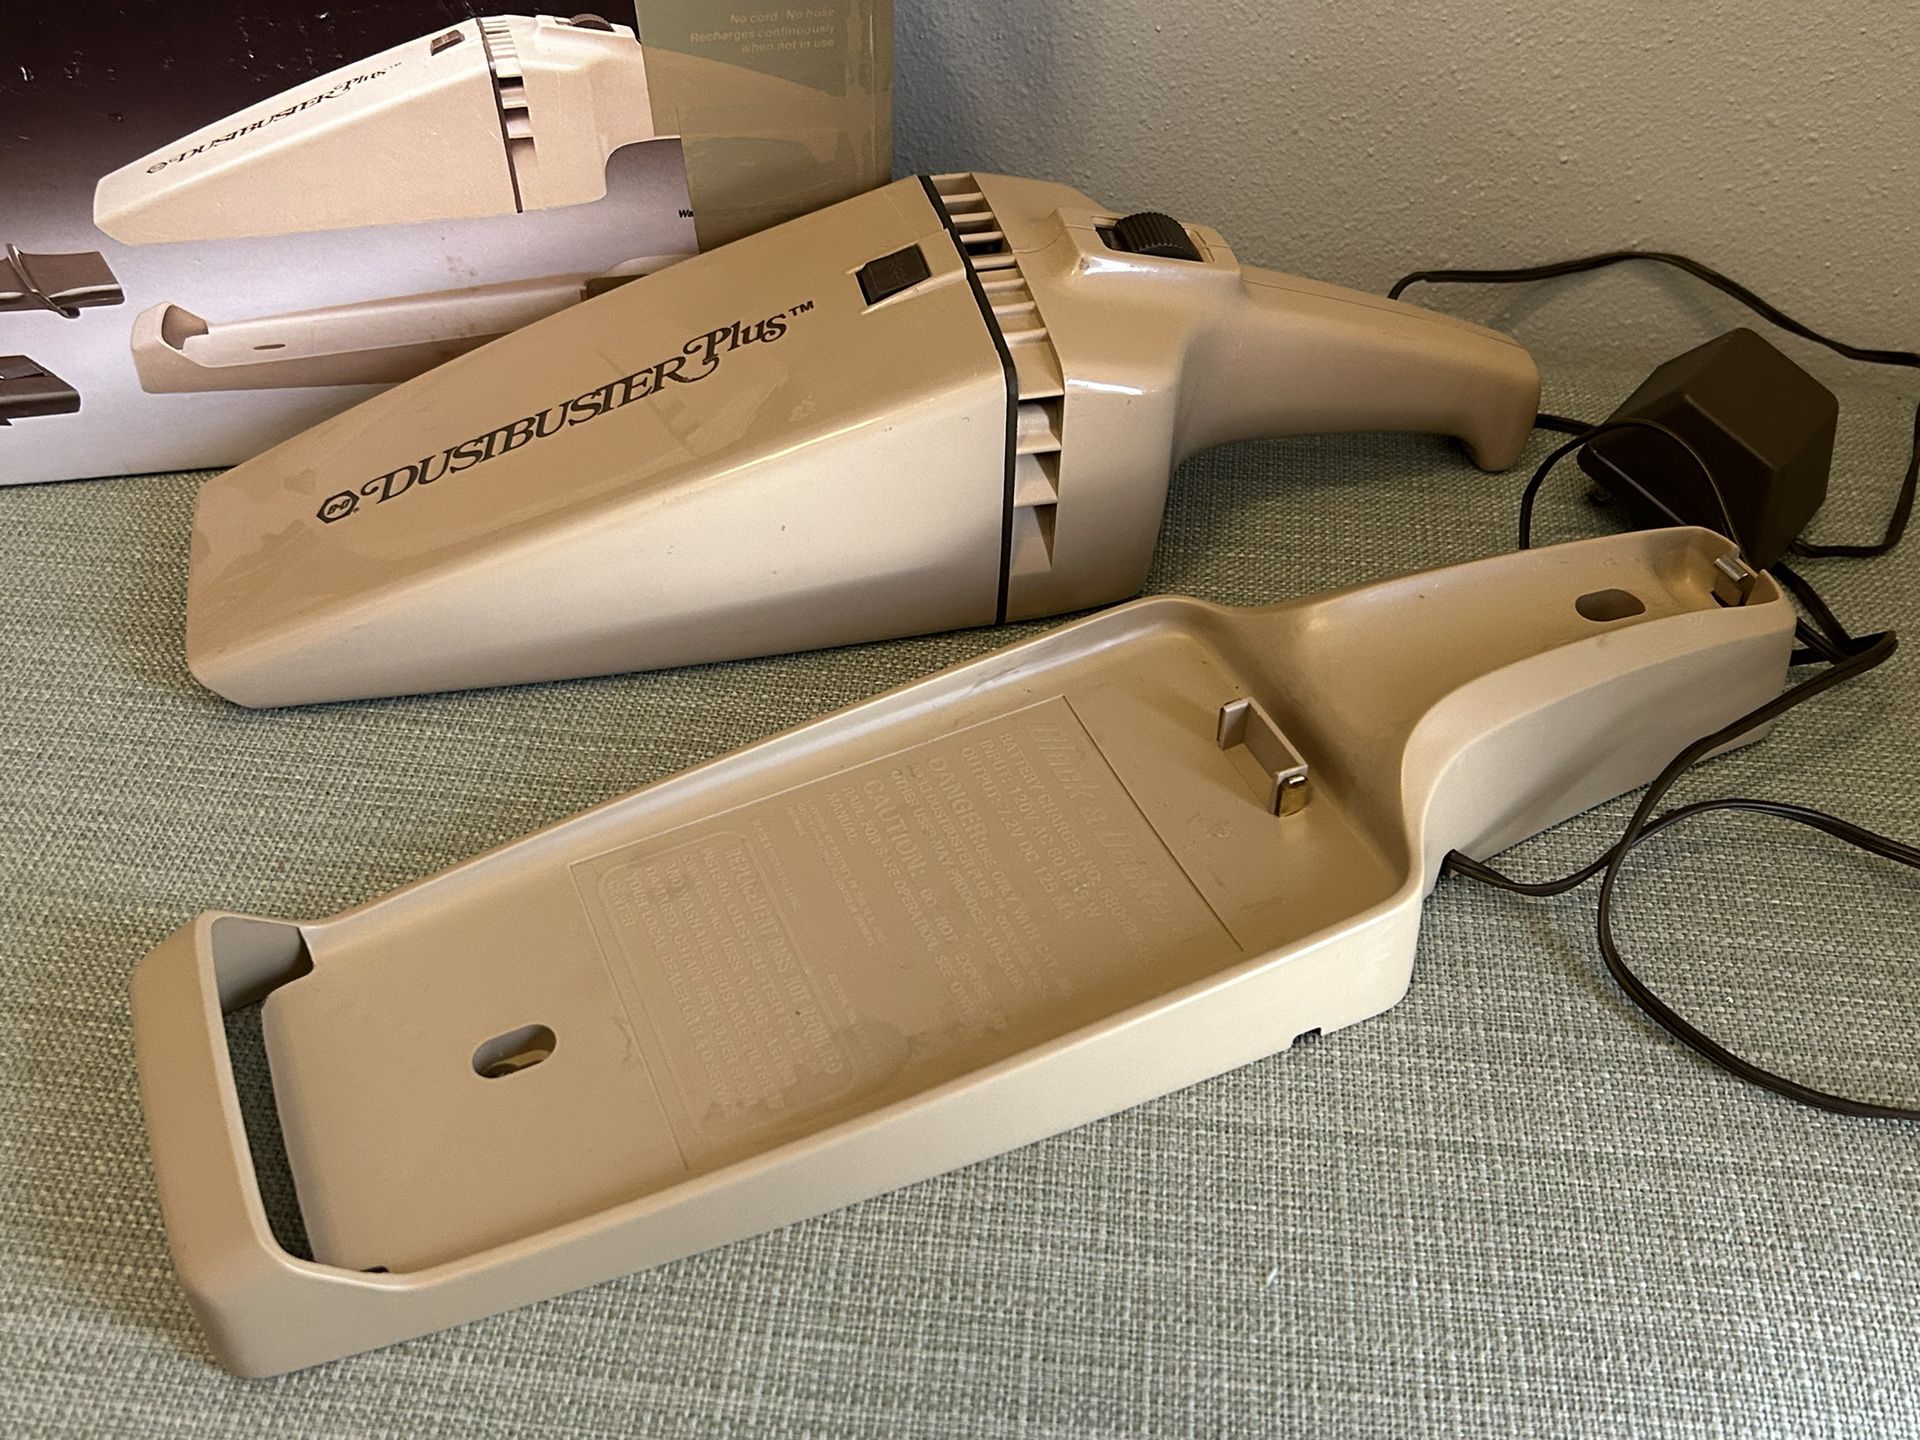 Black And Decker Cordless Hand Vacuum New for Sale in Columbia, MD - OfferUp